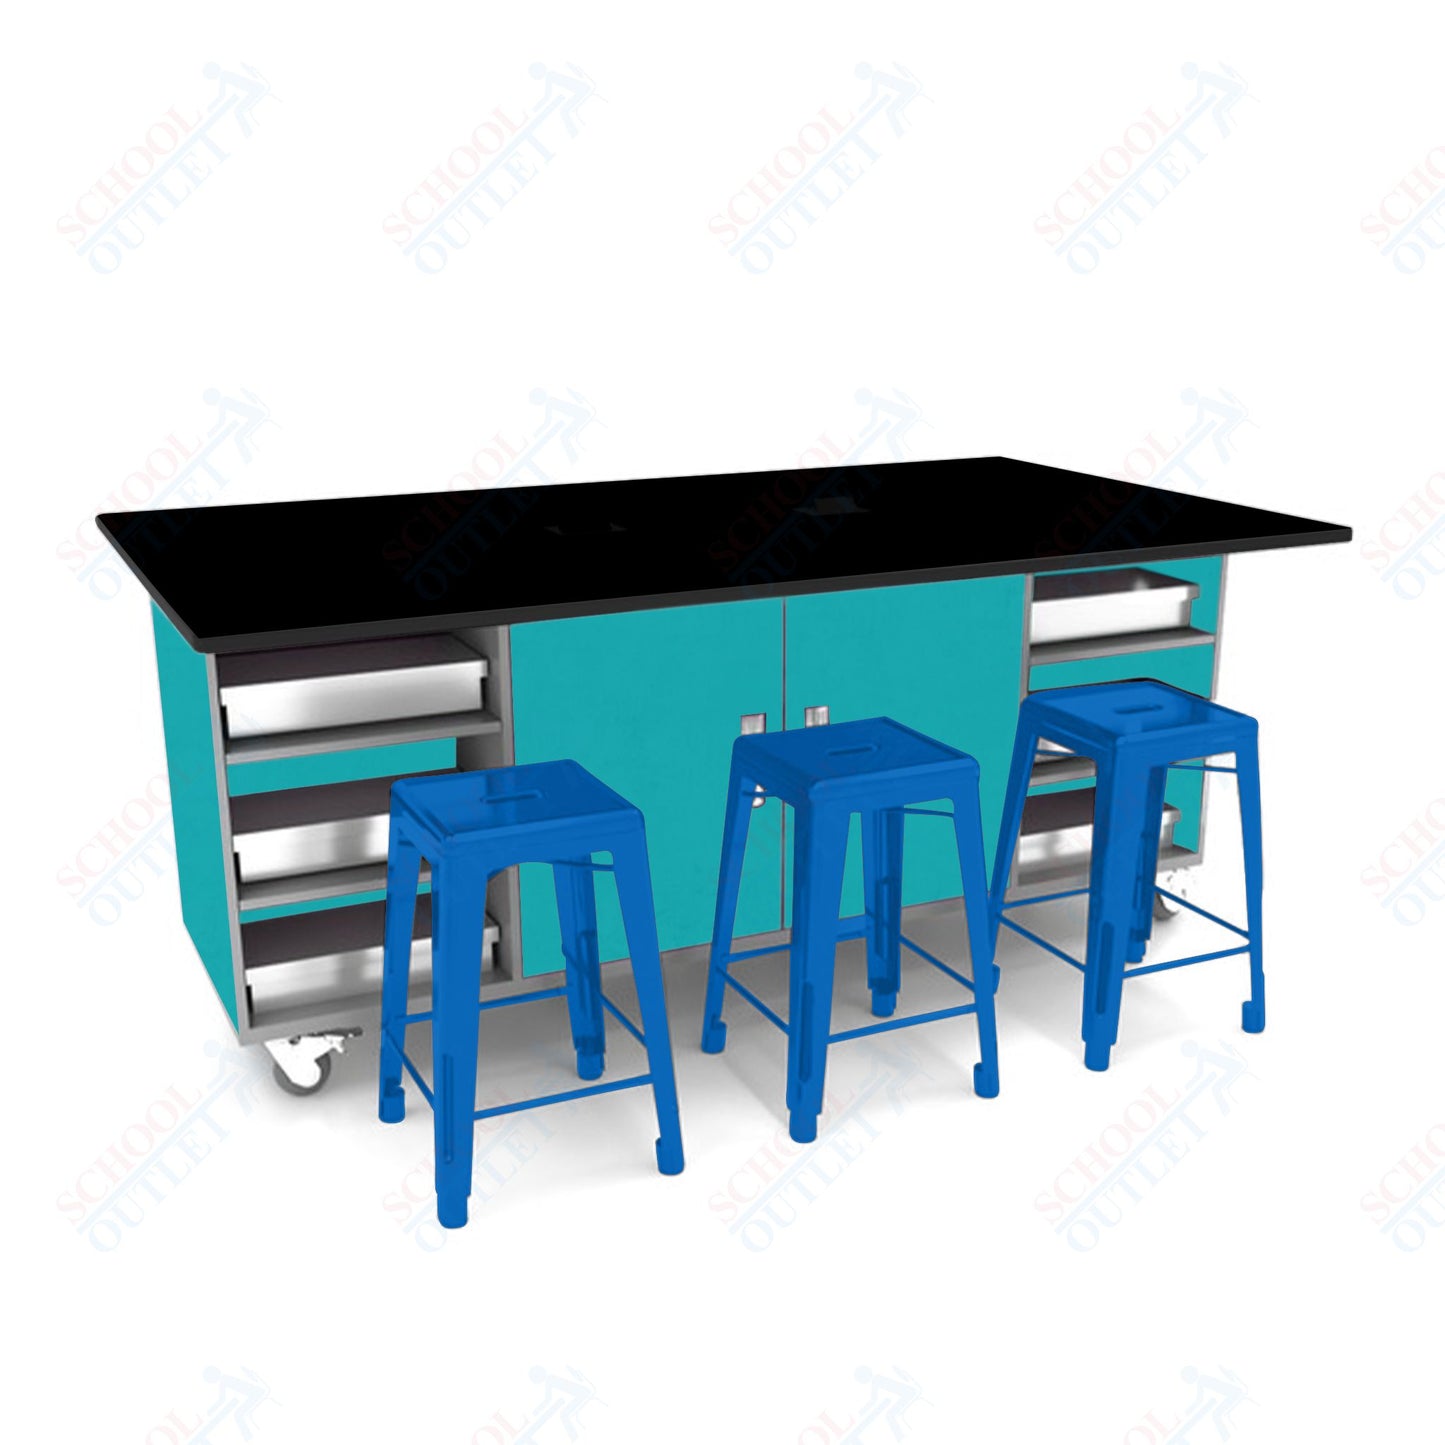 CEF ED Double Table 36"H Tough Top, Laminate Base with  6 Stools, Storage bins, and Electrical Outlets Included.